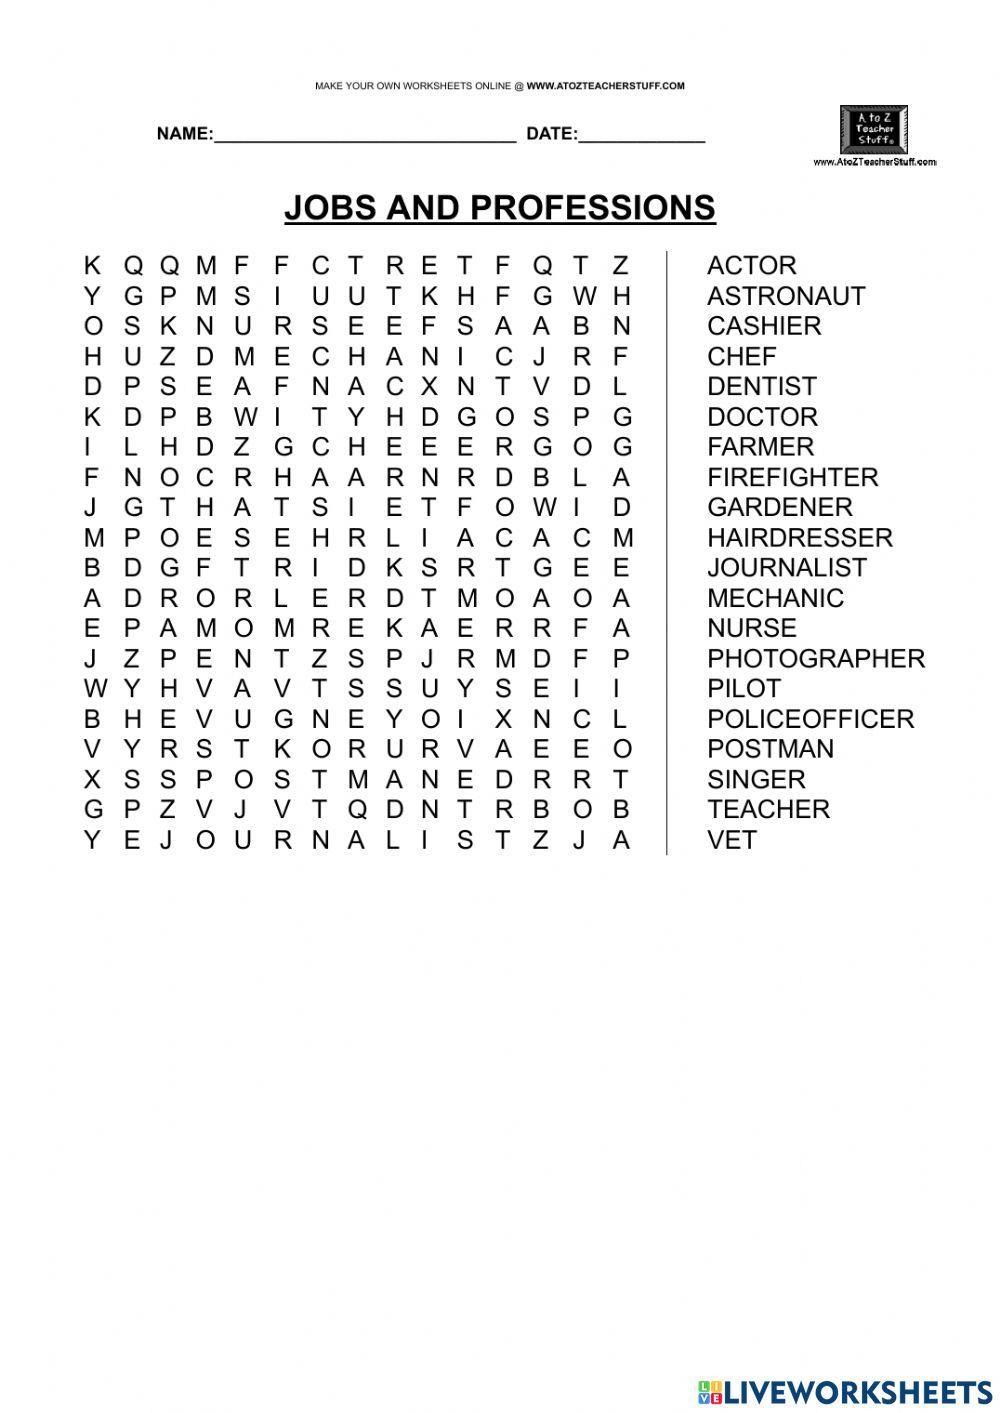 Jobs and professions WORD SEARCH